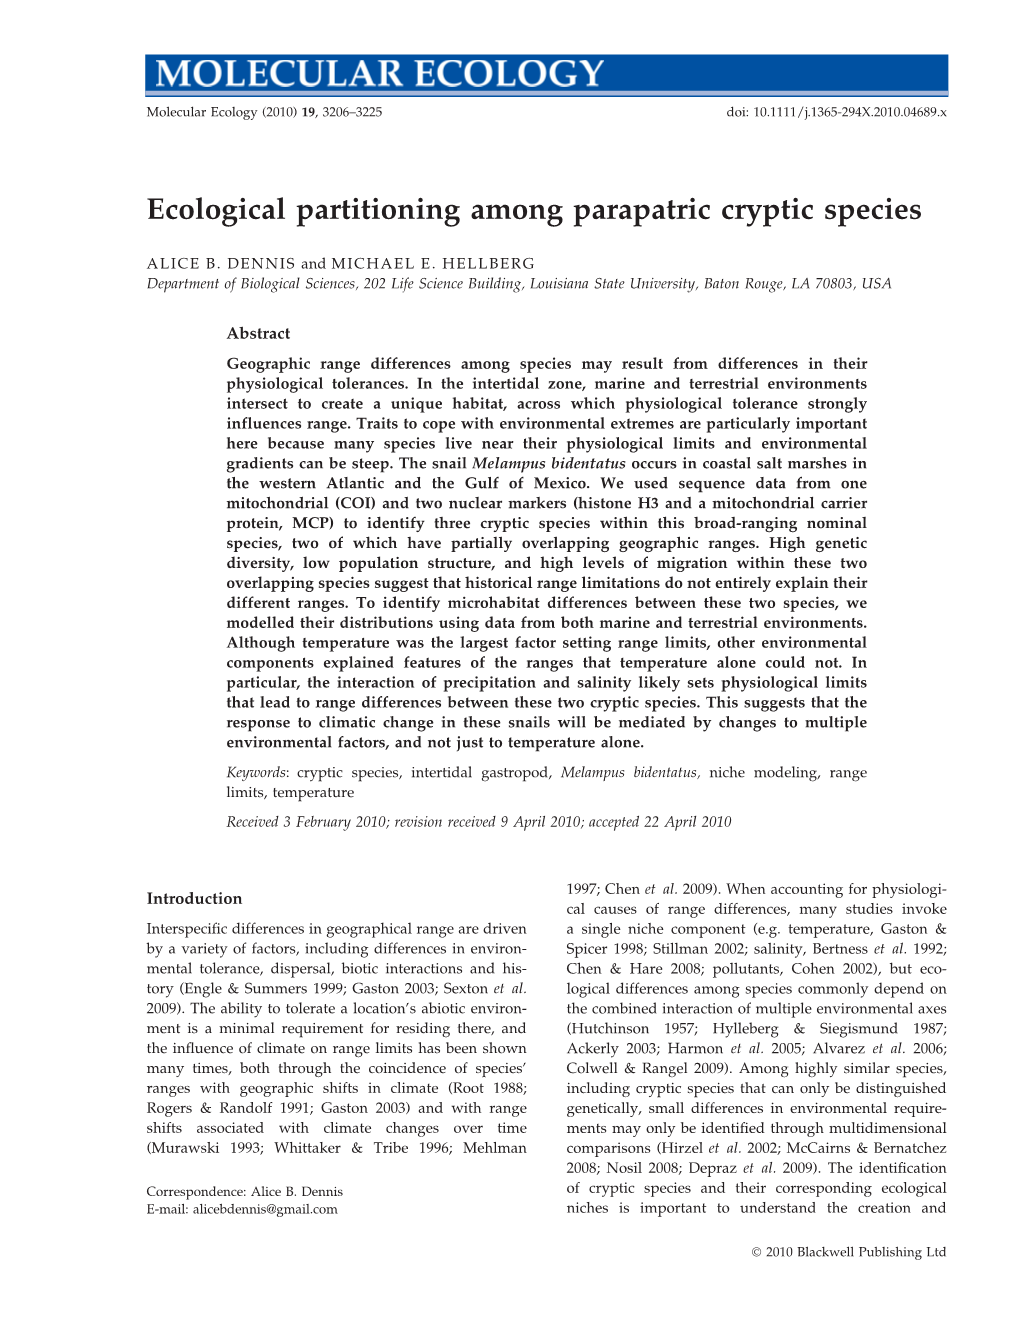 Ecological Partitioning Among Parapatric Cryptic Species